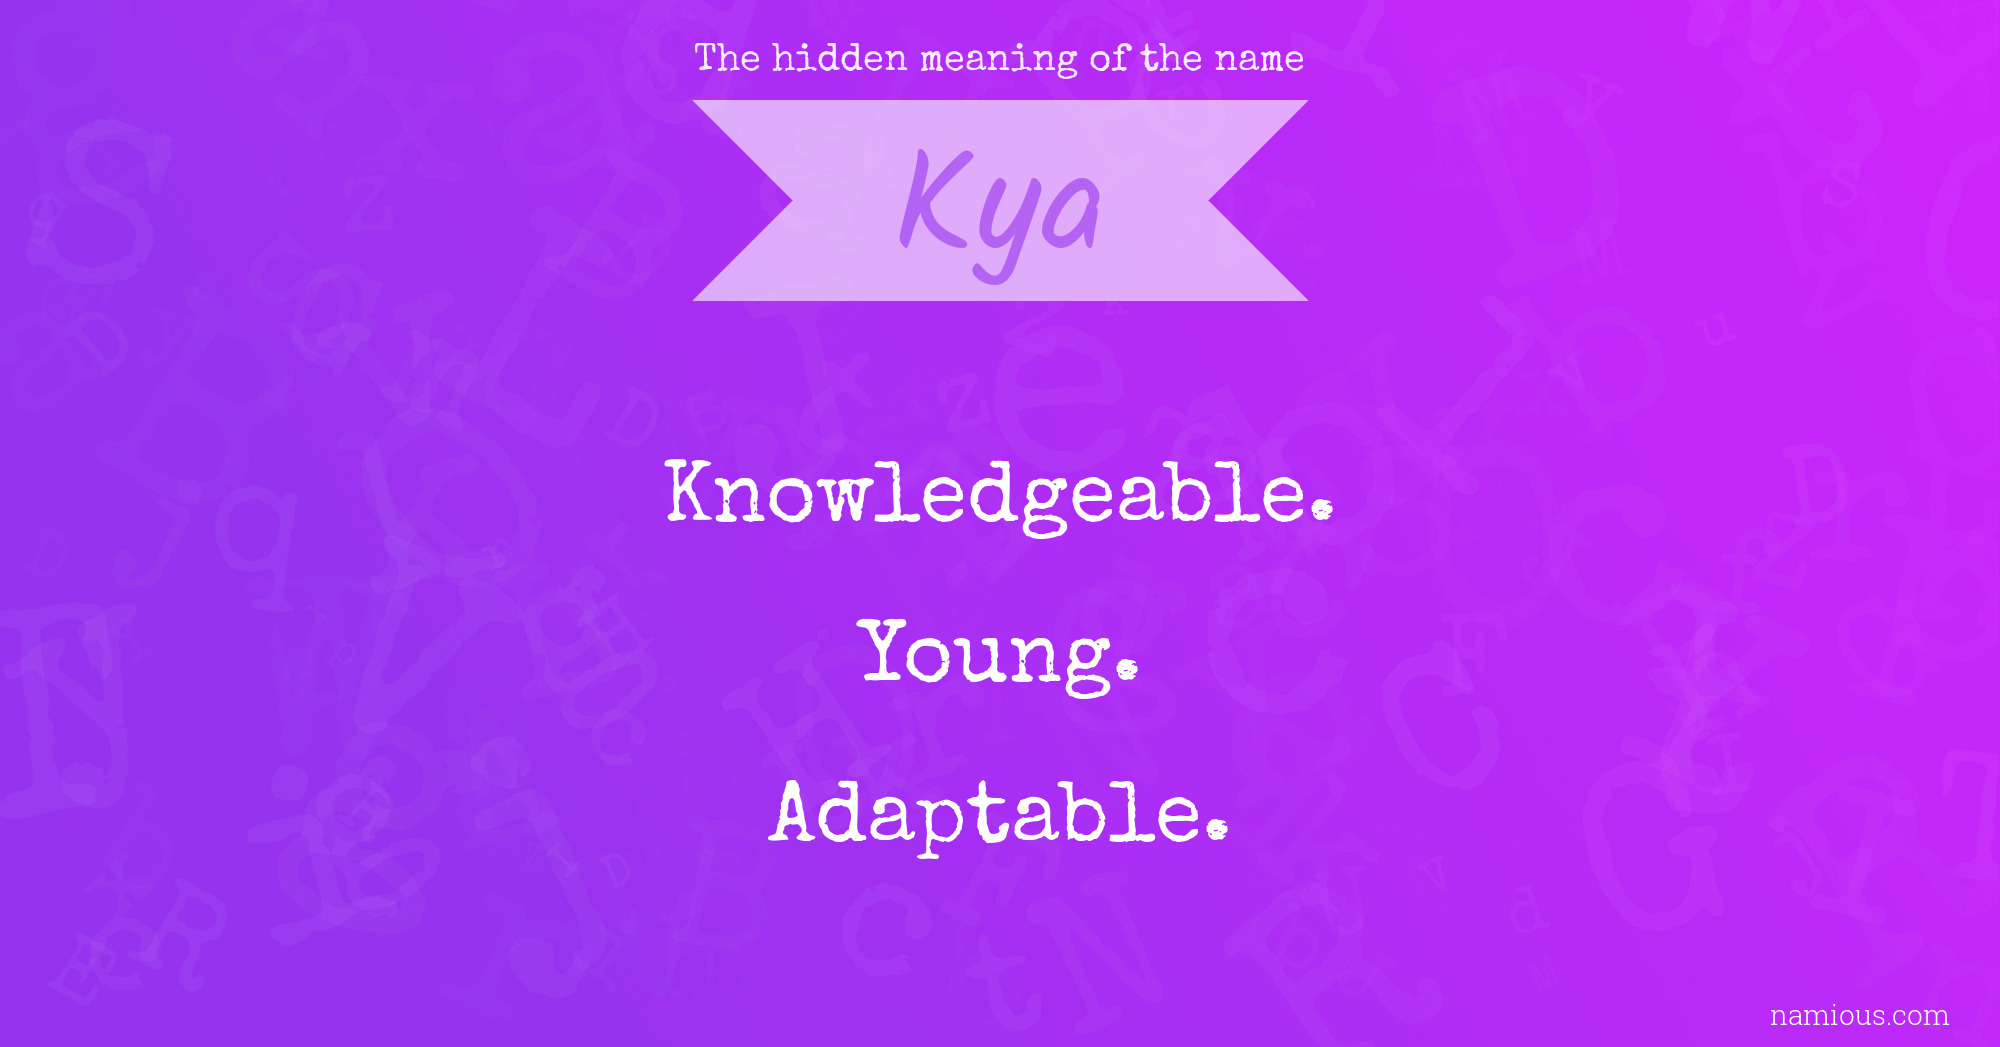 The hidden meaning of the name Kya